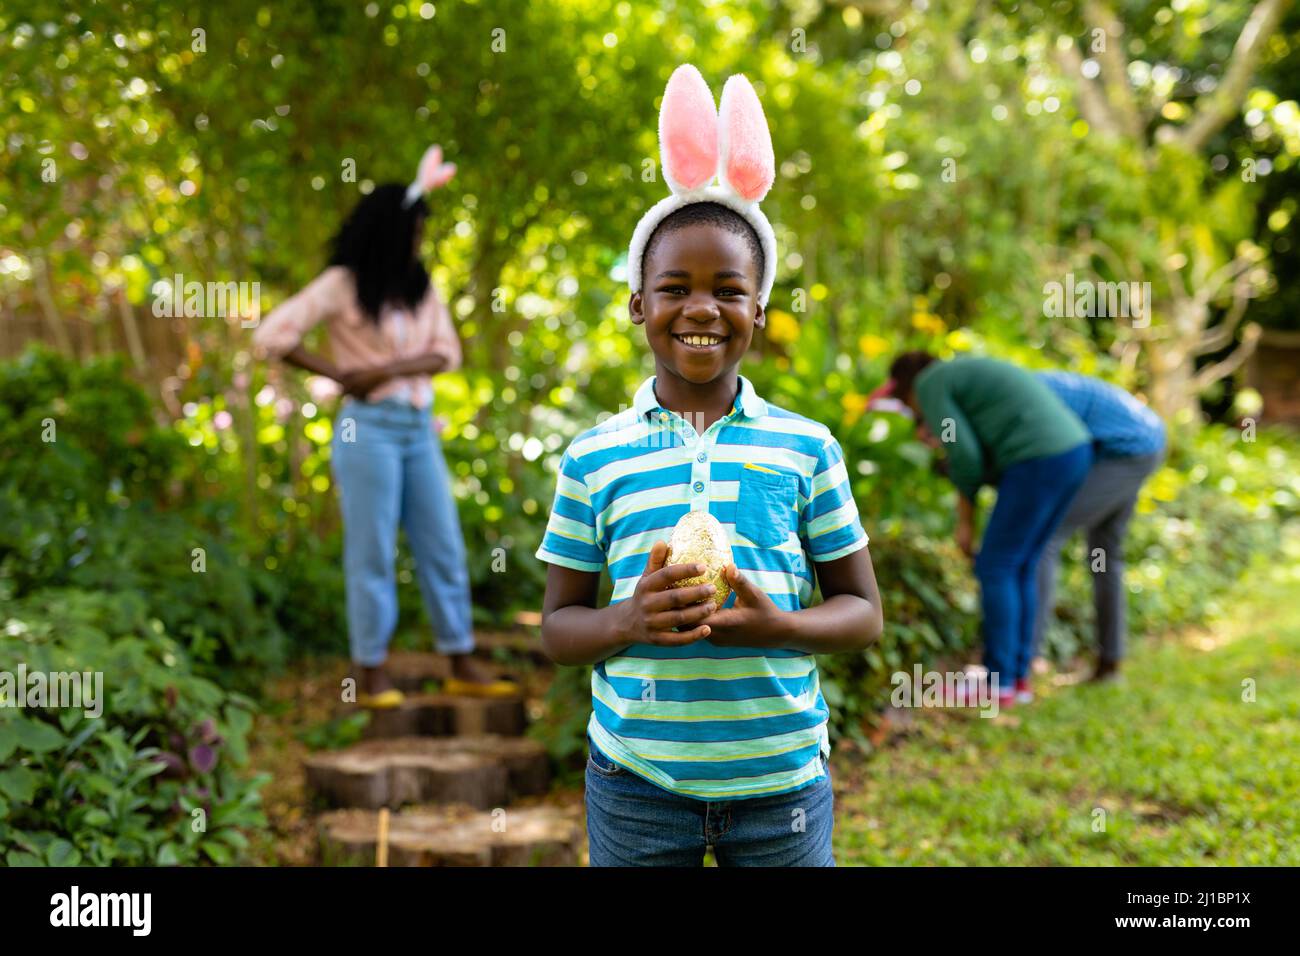 Portrait of happy african american boy in bunny ears holding easter egg while family in backyard Stock Photo